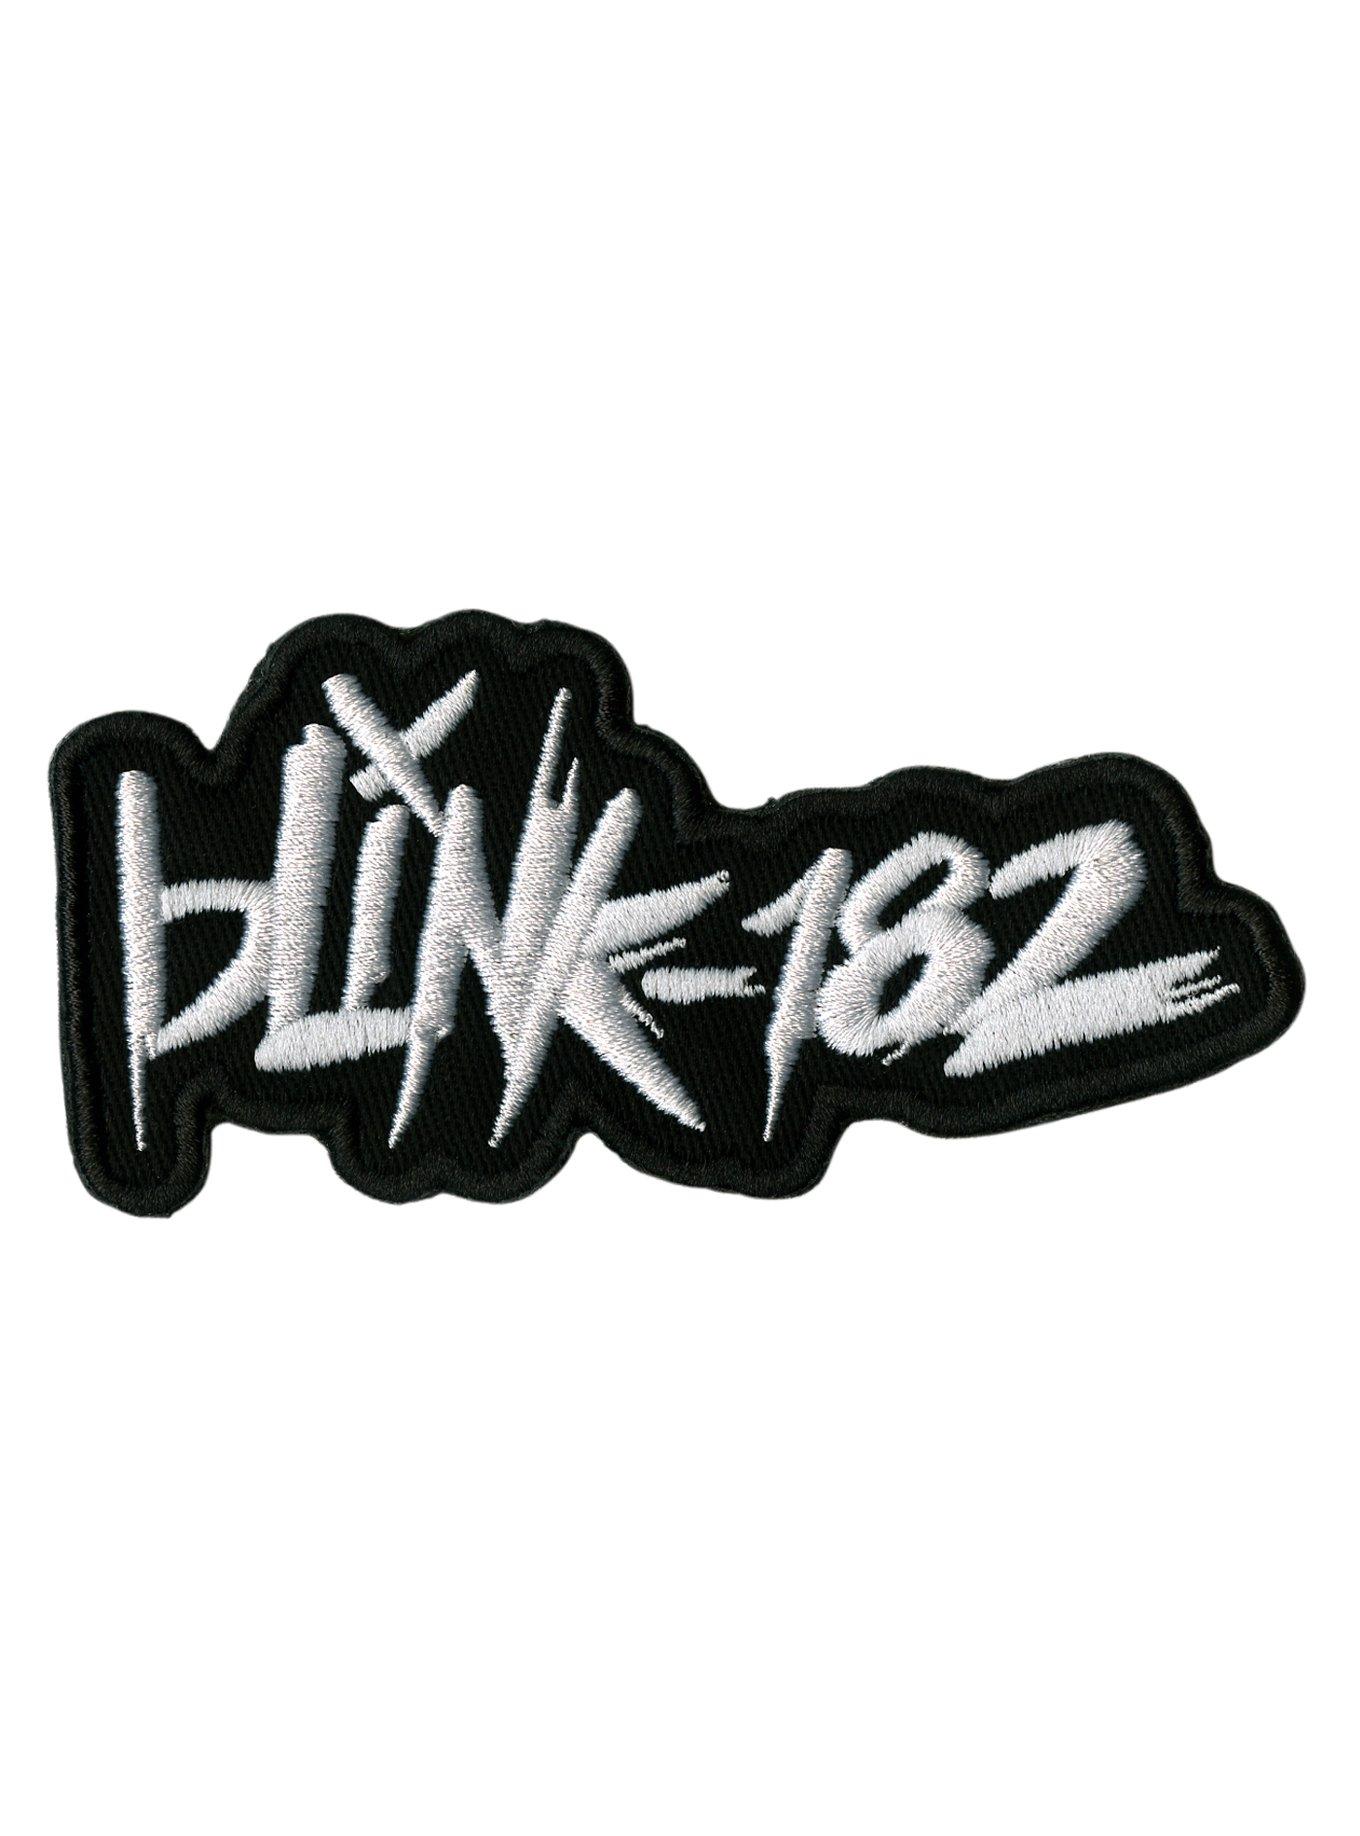 Blink-182 Logo Iron-On Patch, , hi-res